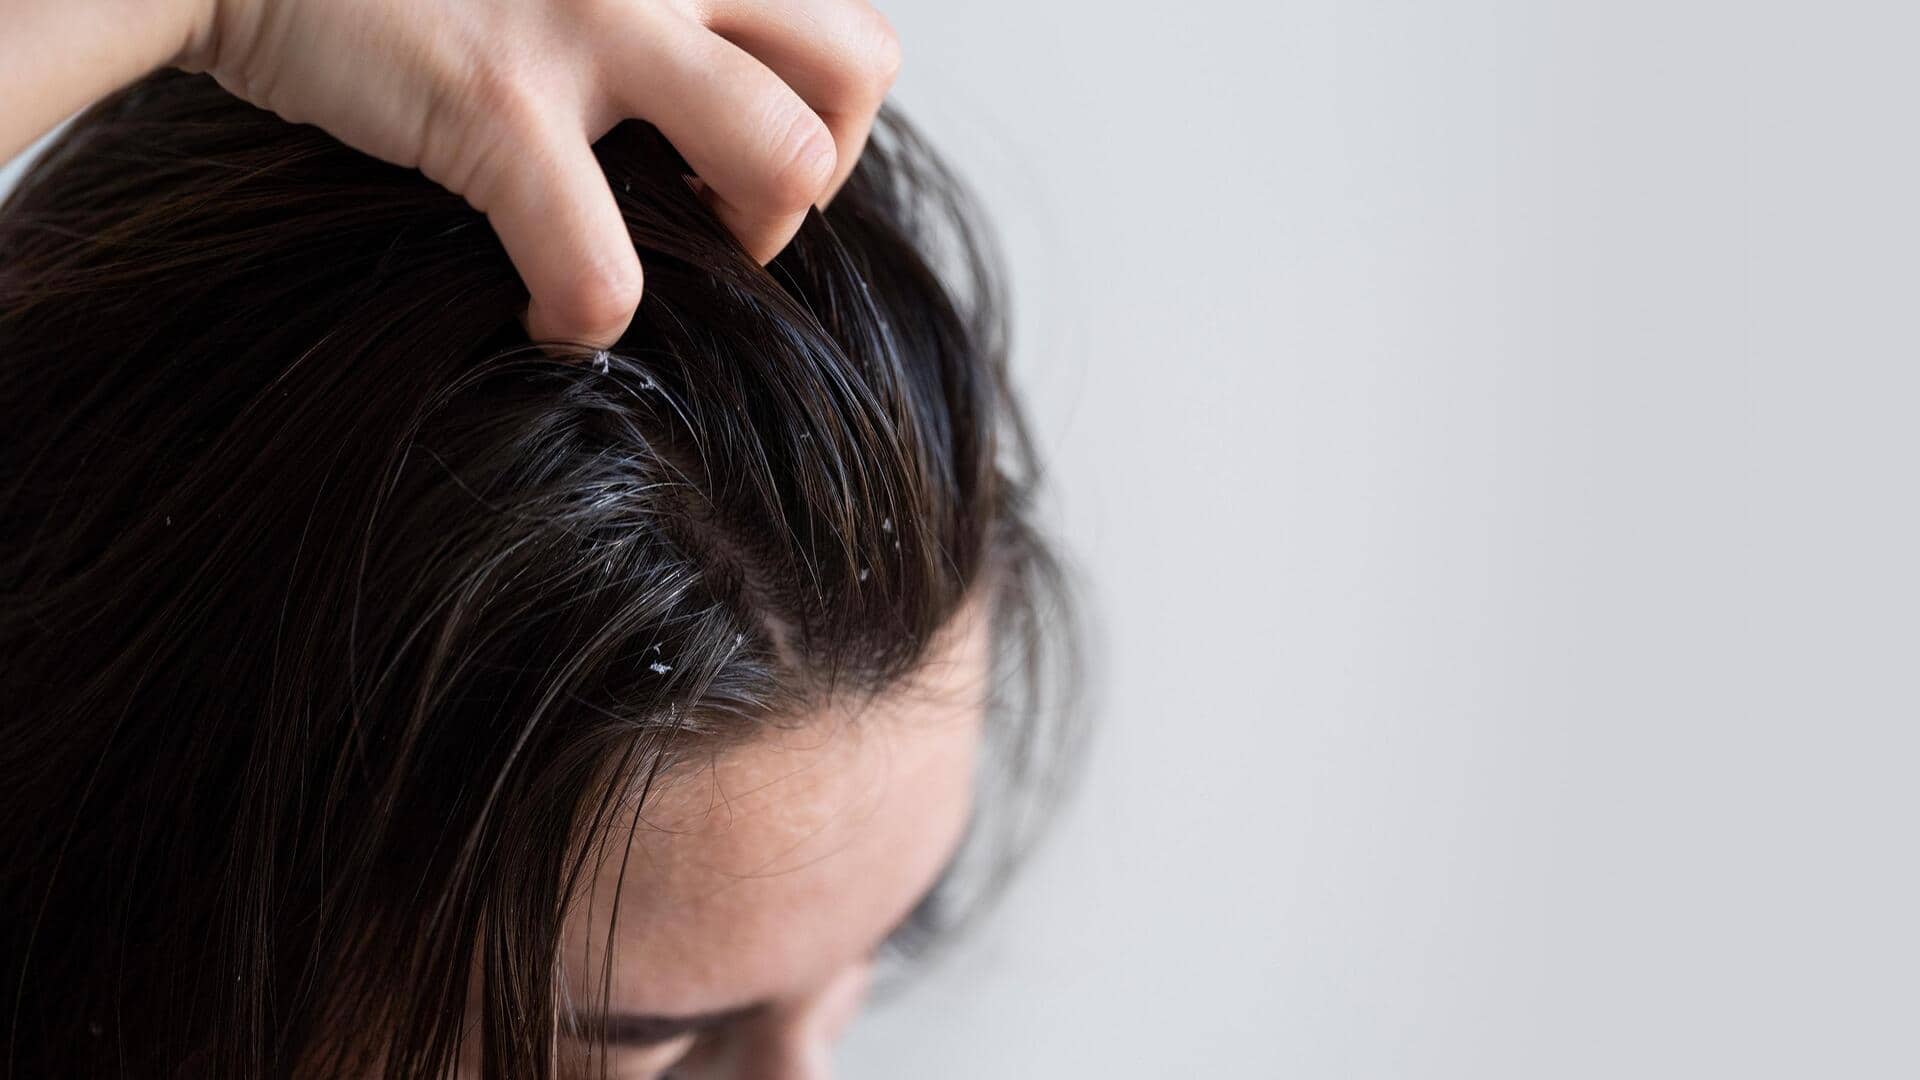 Suffering from scalp acne? Here are 5 natural remedies